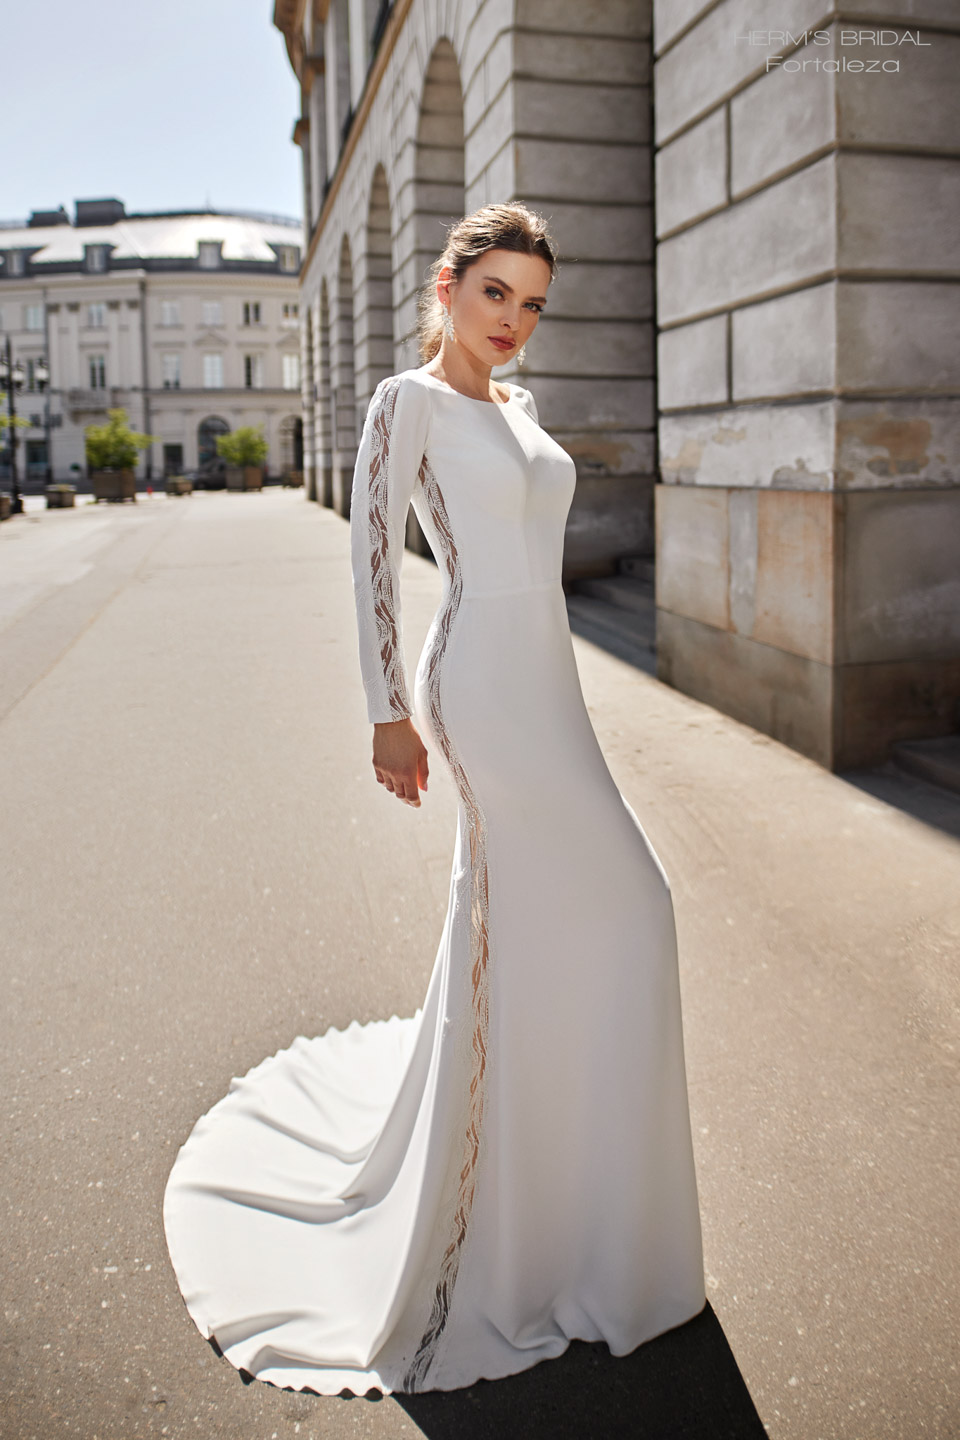 Forteleza by Herms Bridal at Belladonna Bridal in Galway